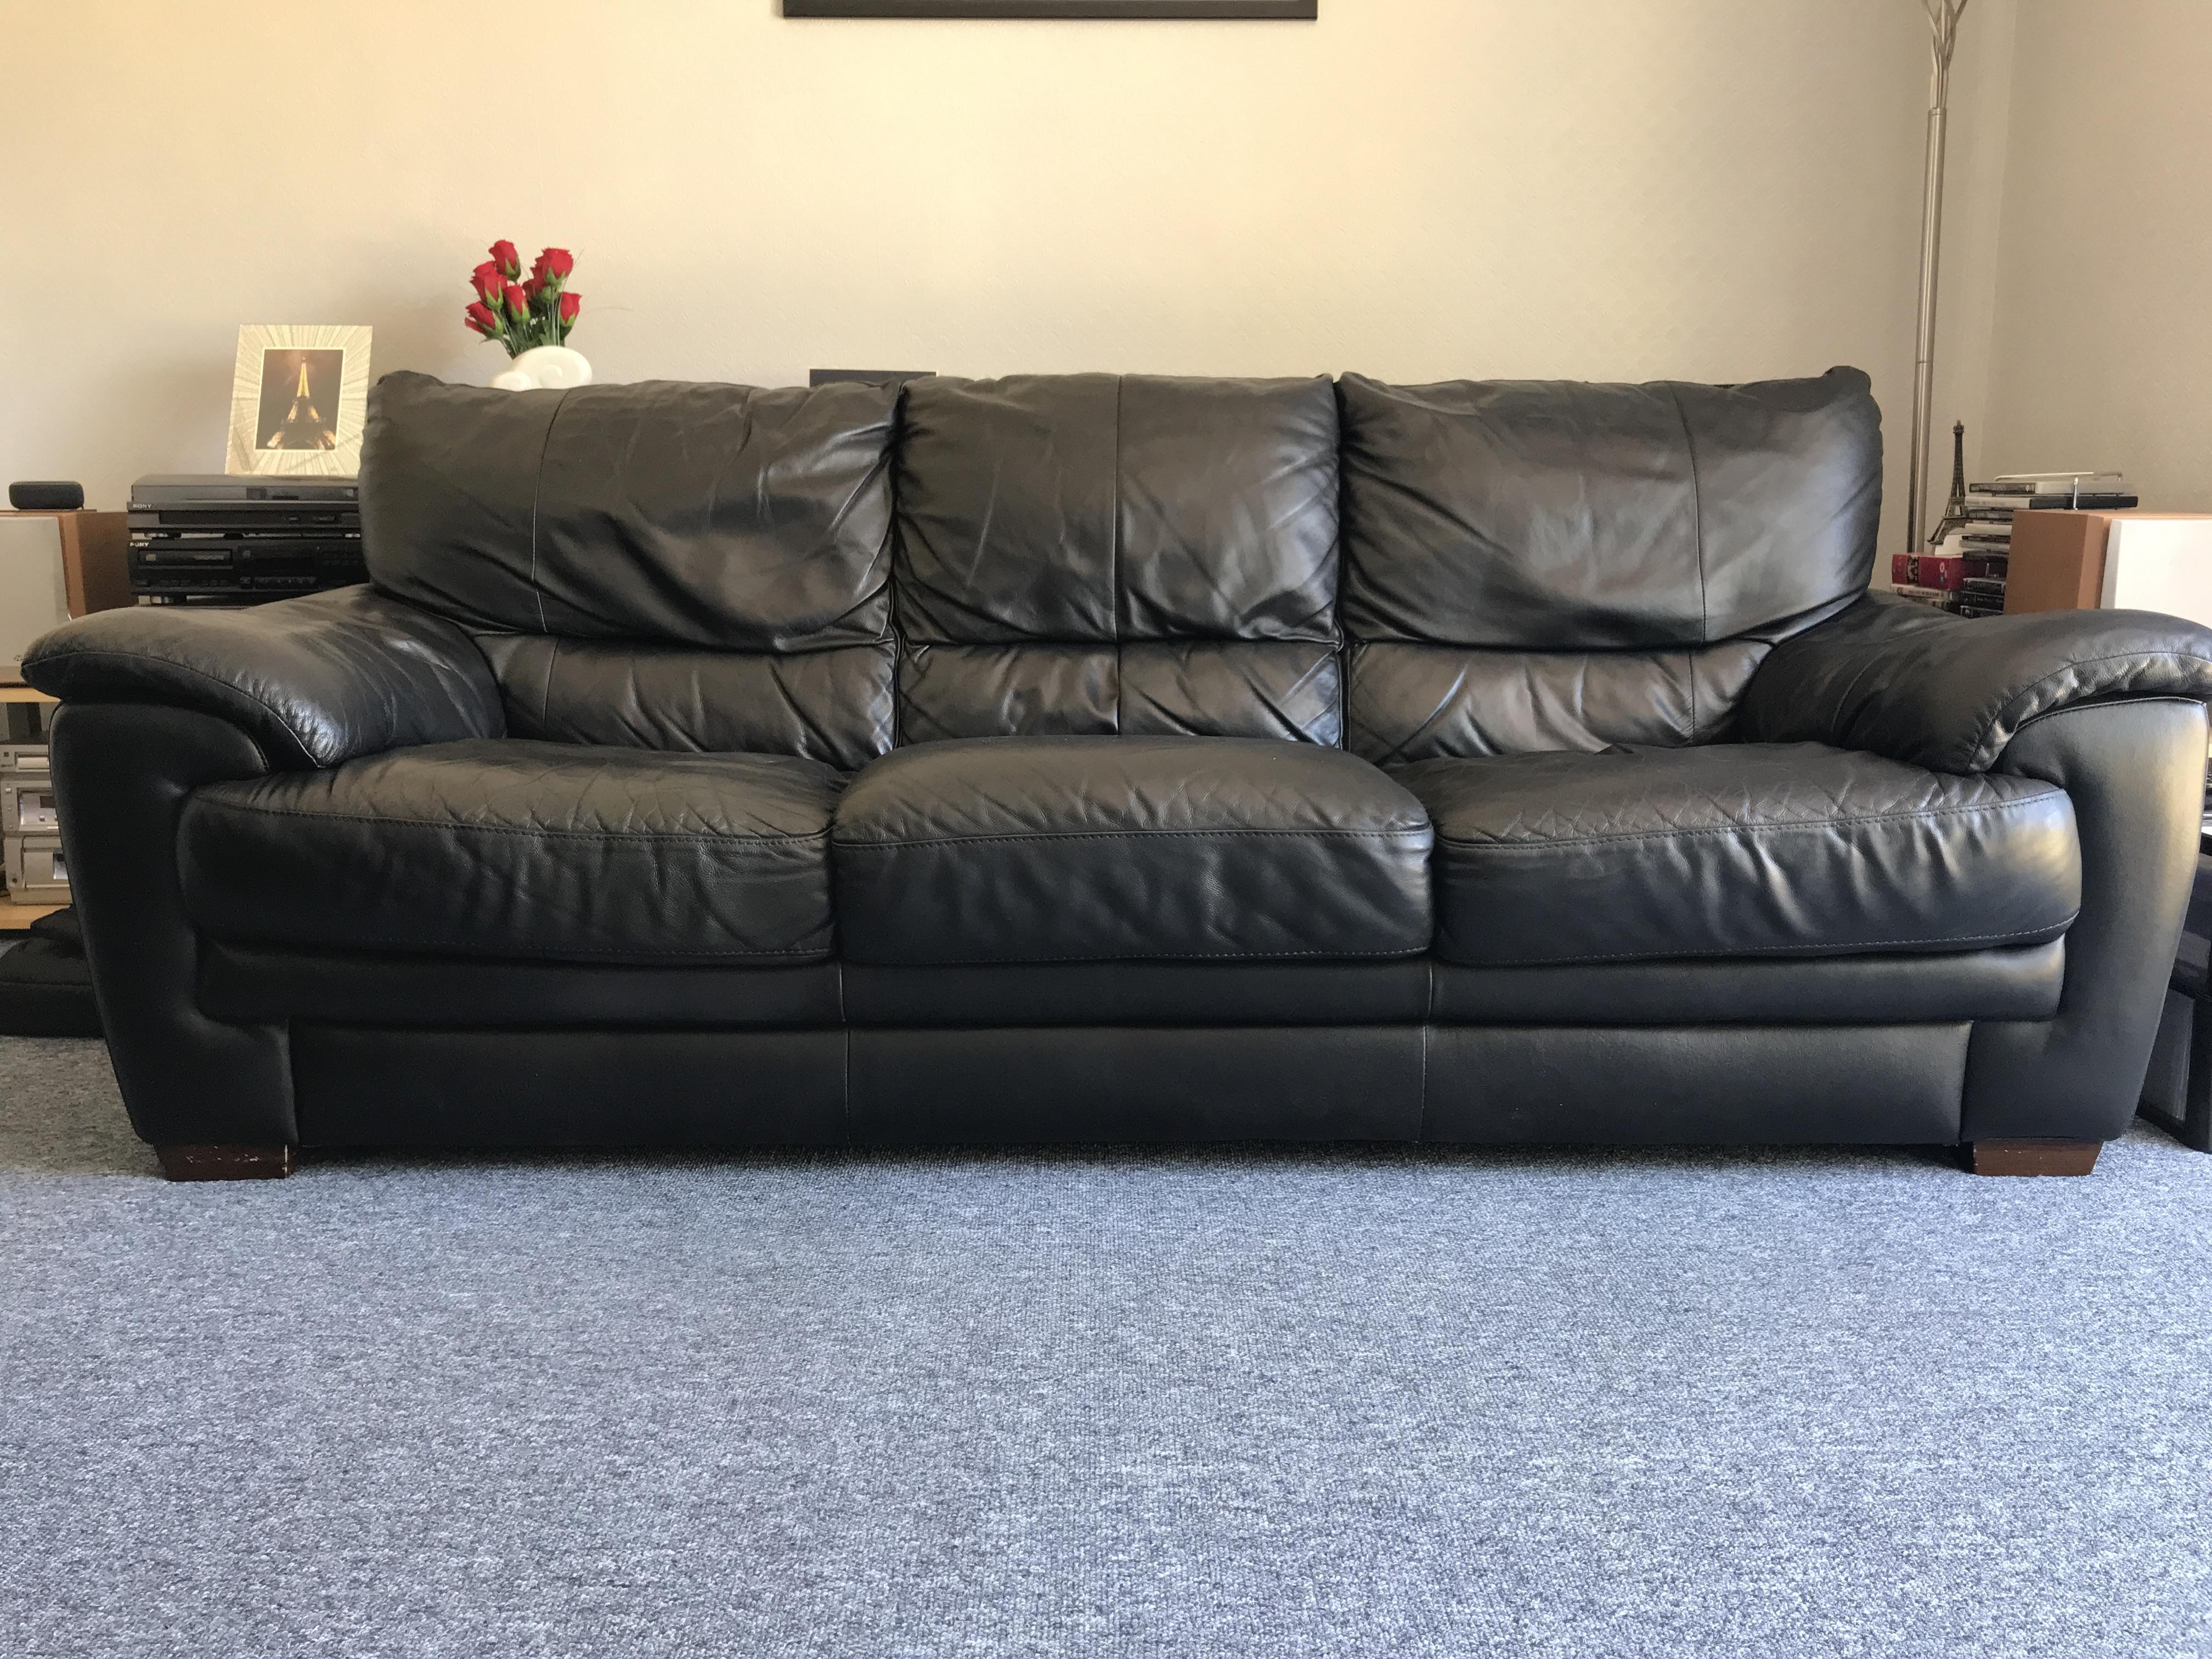 matching armchair with black leather sofa